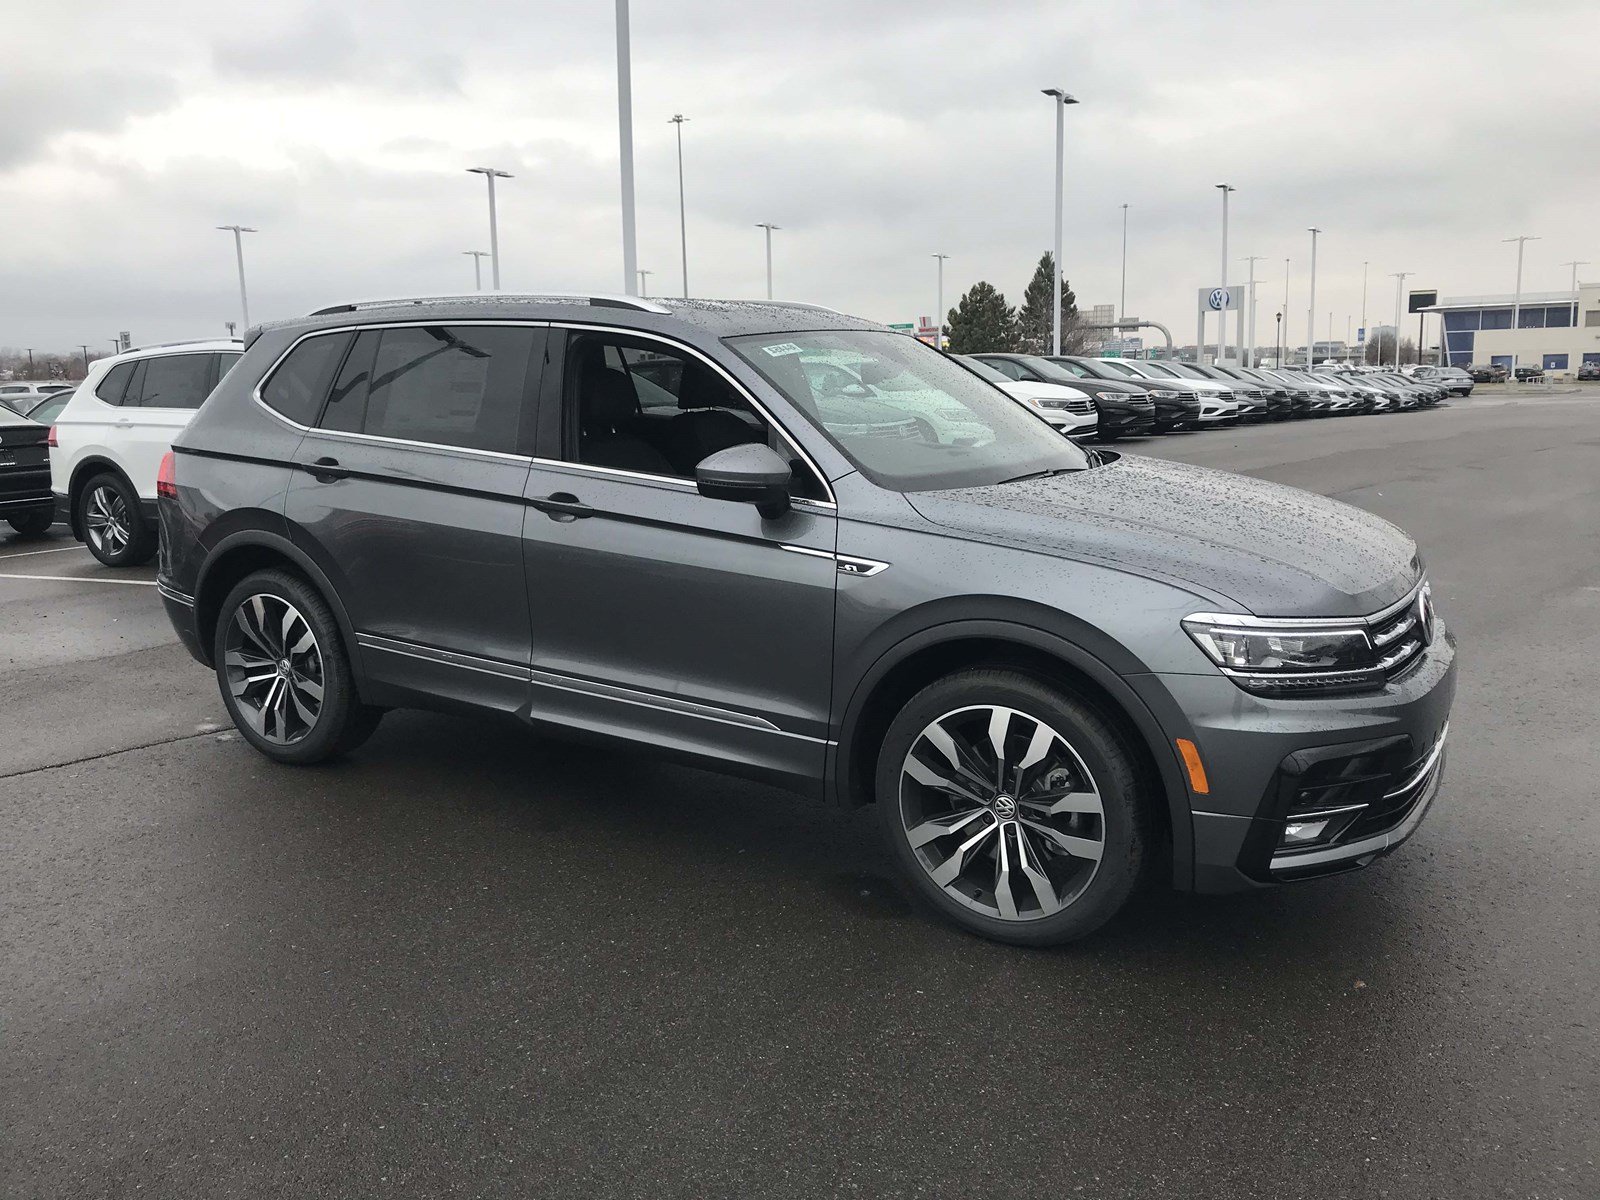 New 2019 Volkswagen Tiguan Sel Premium R Line With Navigation Awd